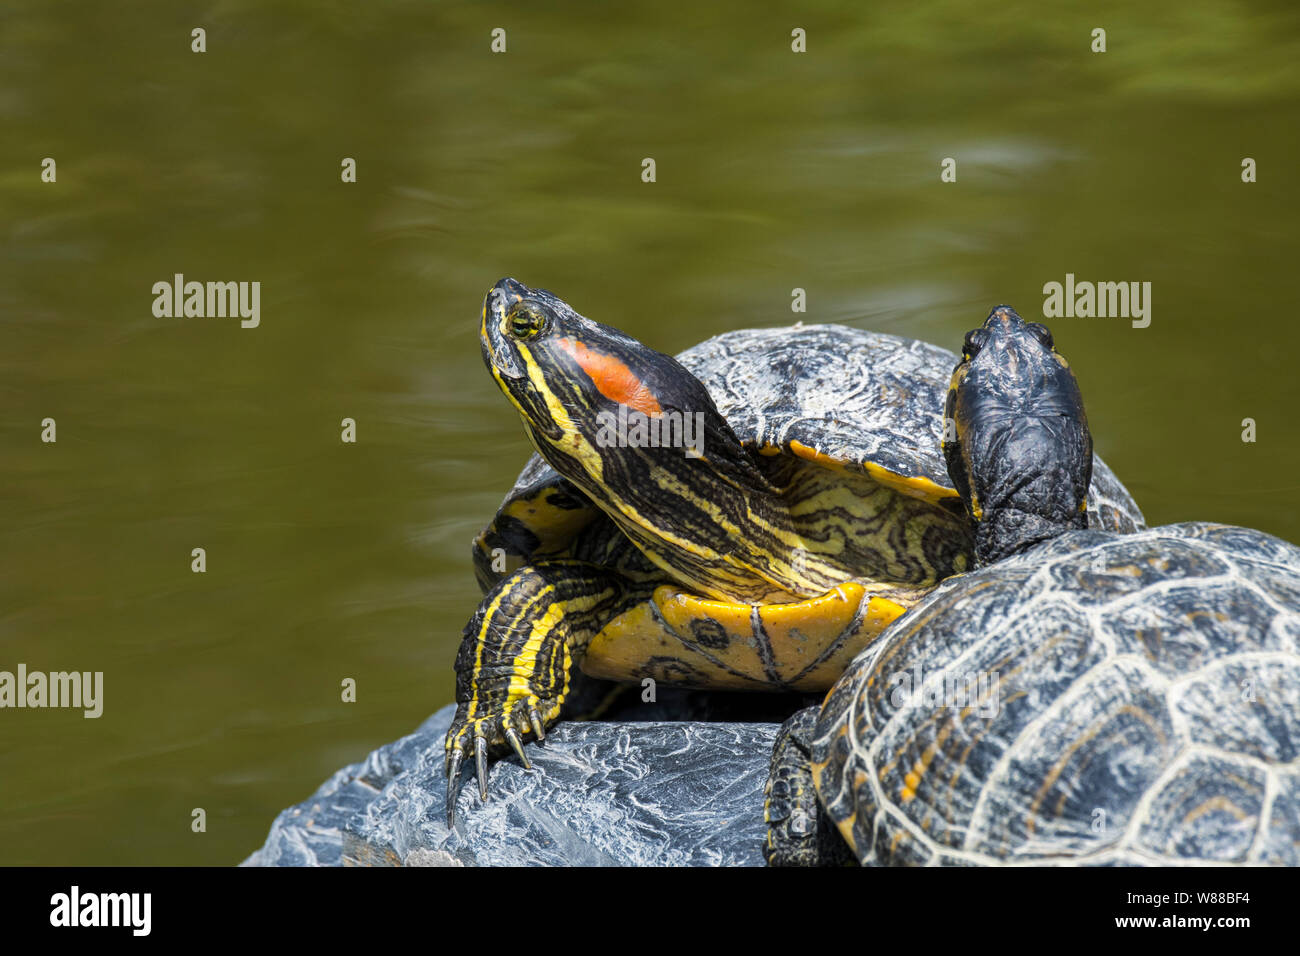 Red-eared slider / red-eared terrapin (Trachemys scripta elegans) pond slider native to the southern United States and northern Mexico Stock Photo